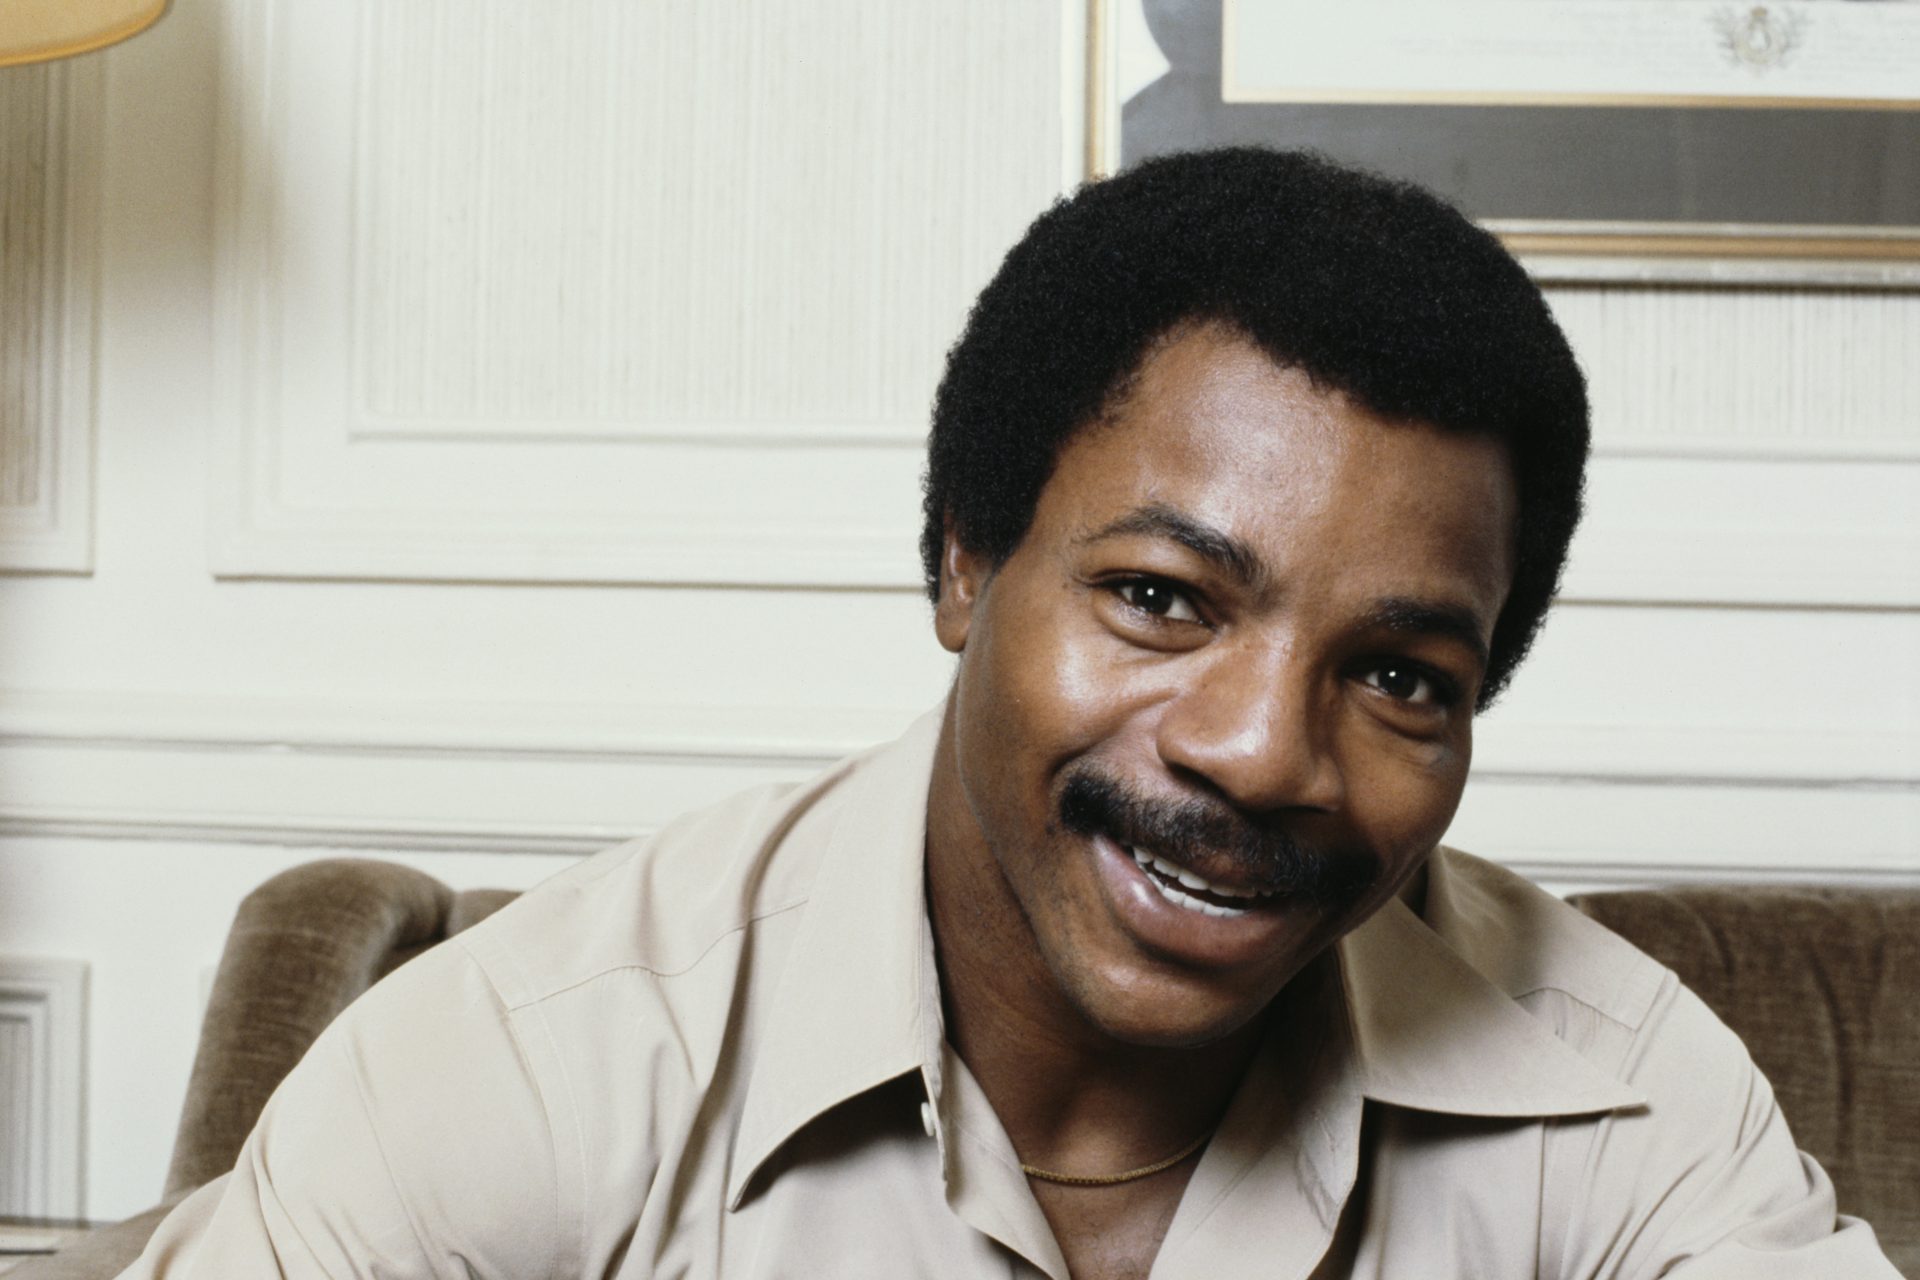 The most famous TV and movie roles of Carl Weathers